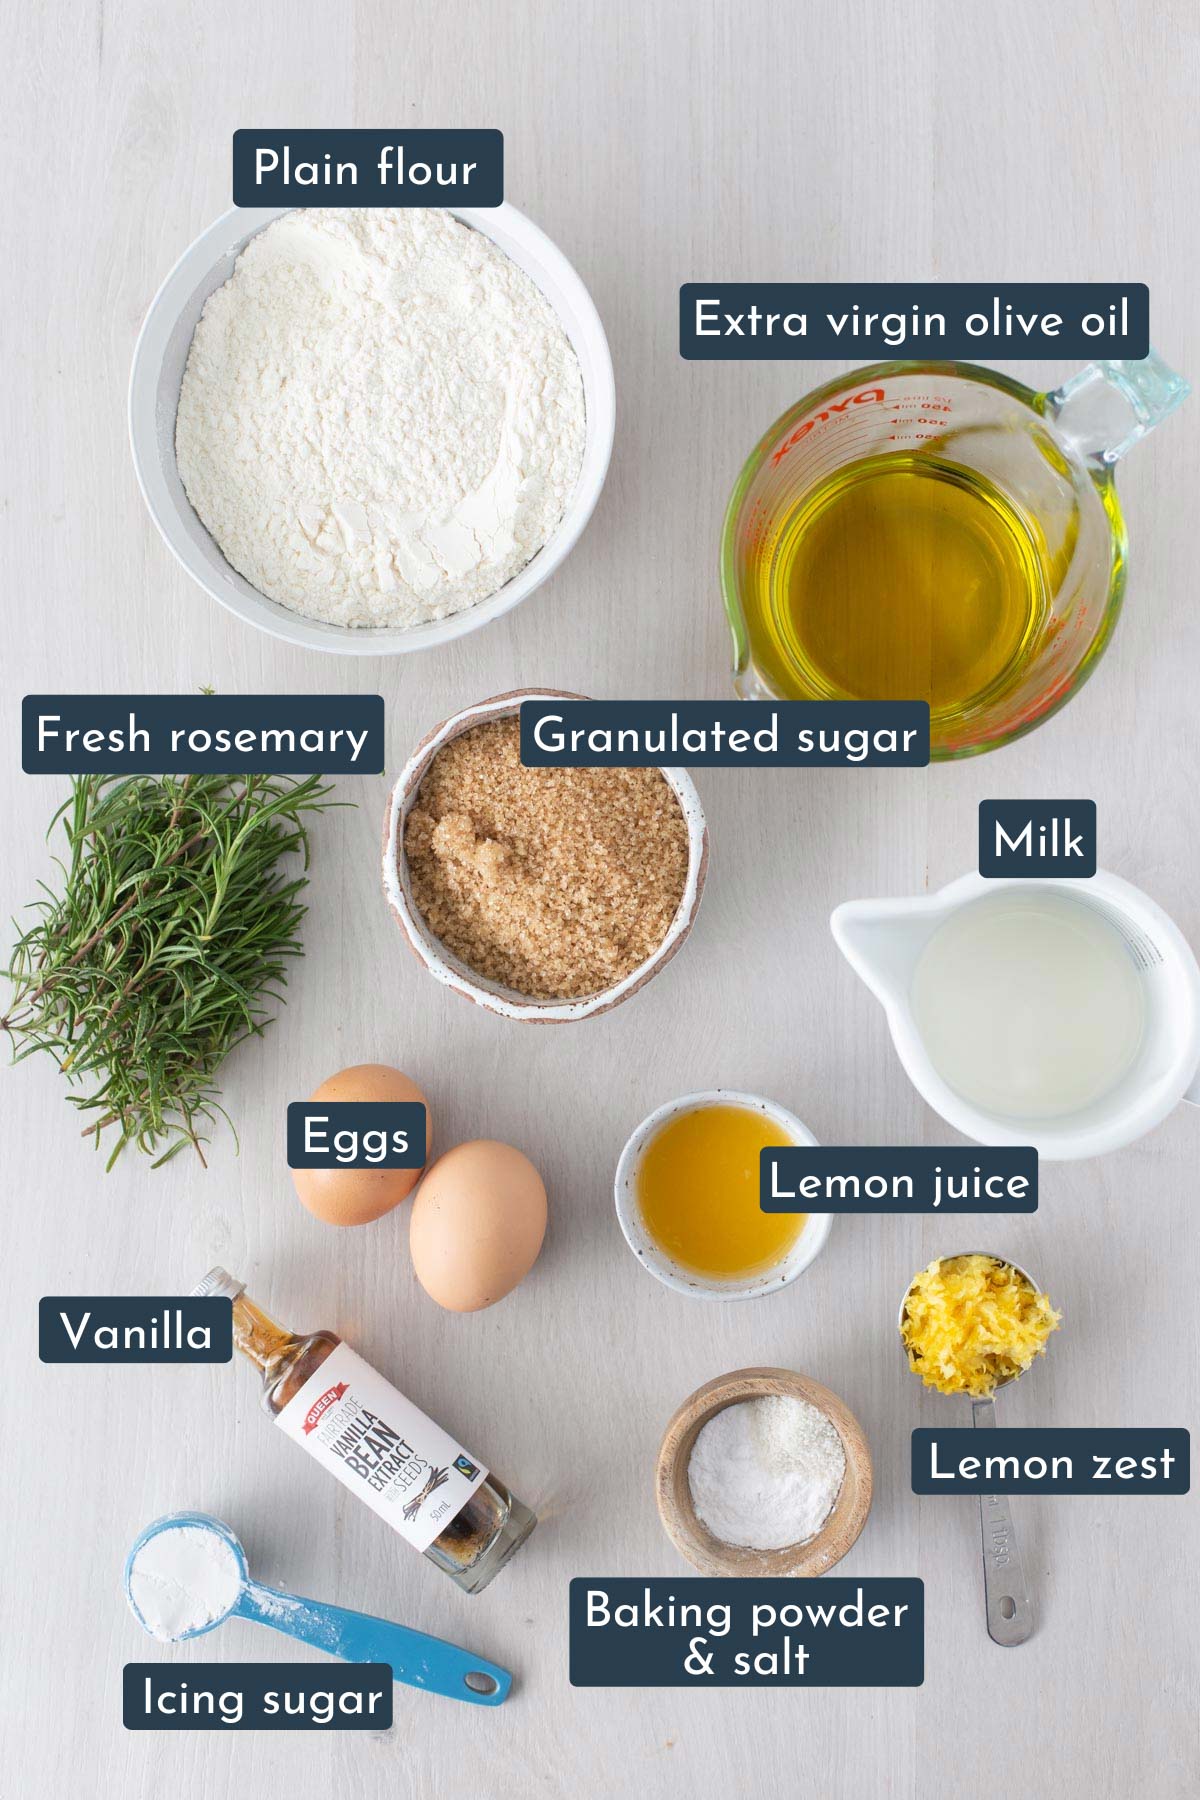 The individual ingredients laid out to show what is needed to bake this cake.